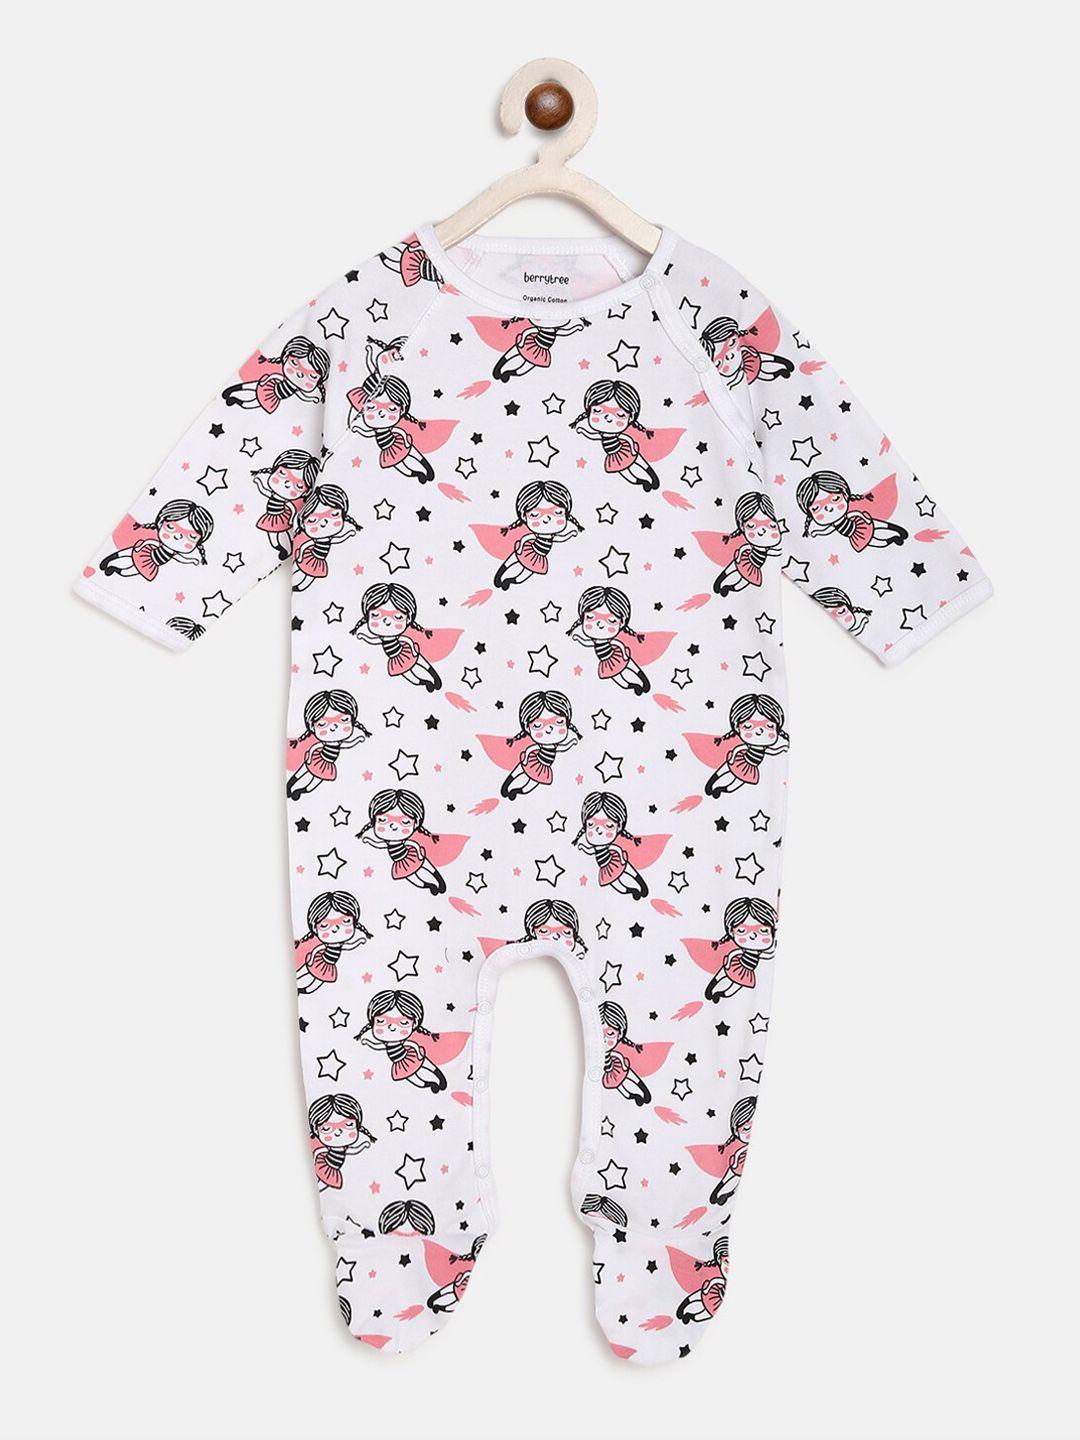 berrytree kids pink & white printed organic cotton sustainable rompers